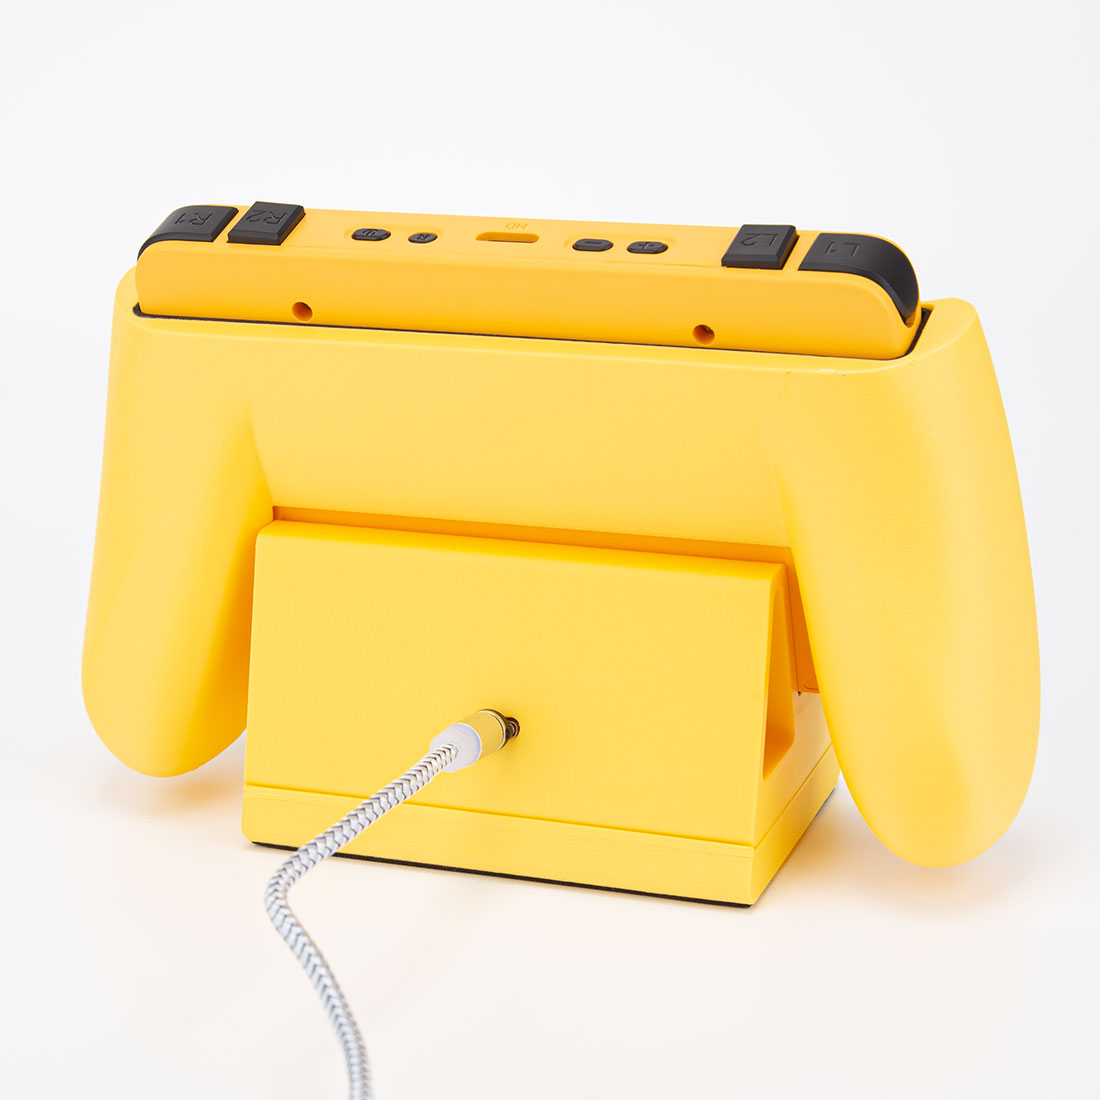 litnxt-3D-printed-magnetic-charging-base-for-rgb30-game-console-yellow-6